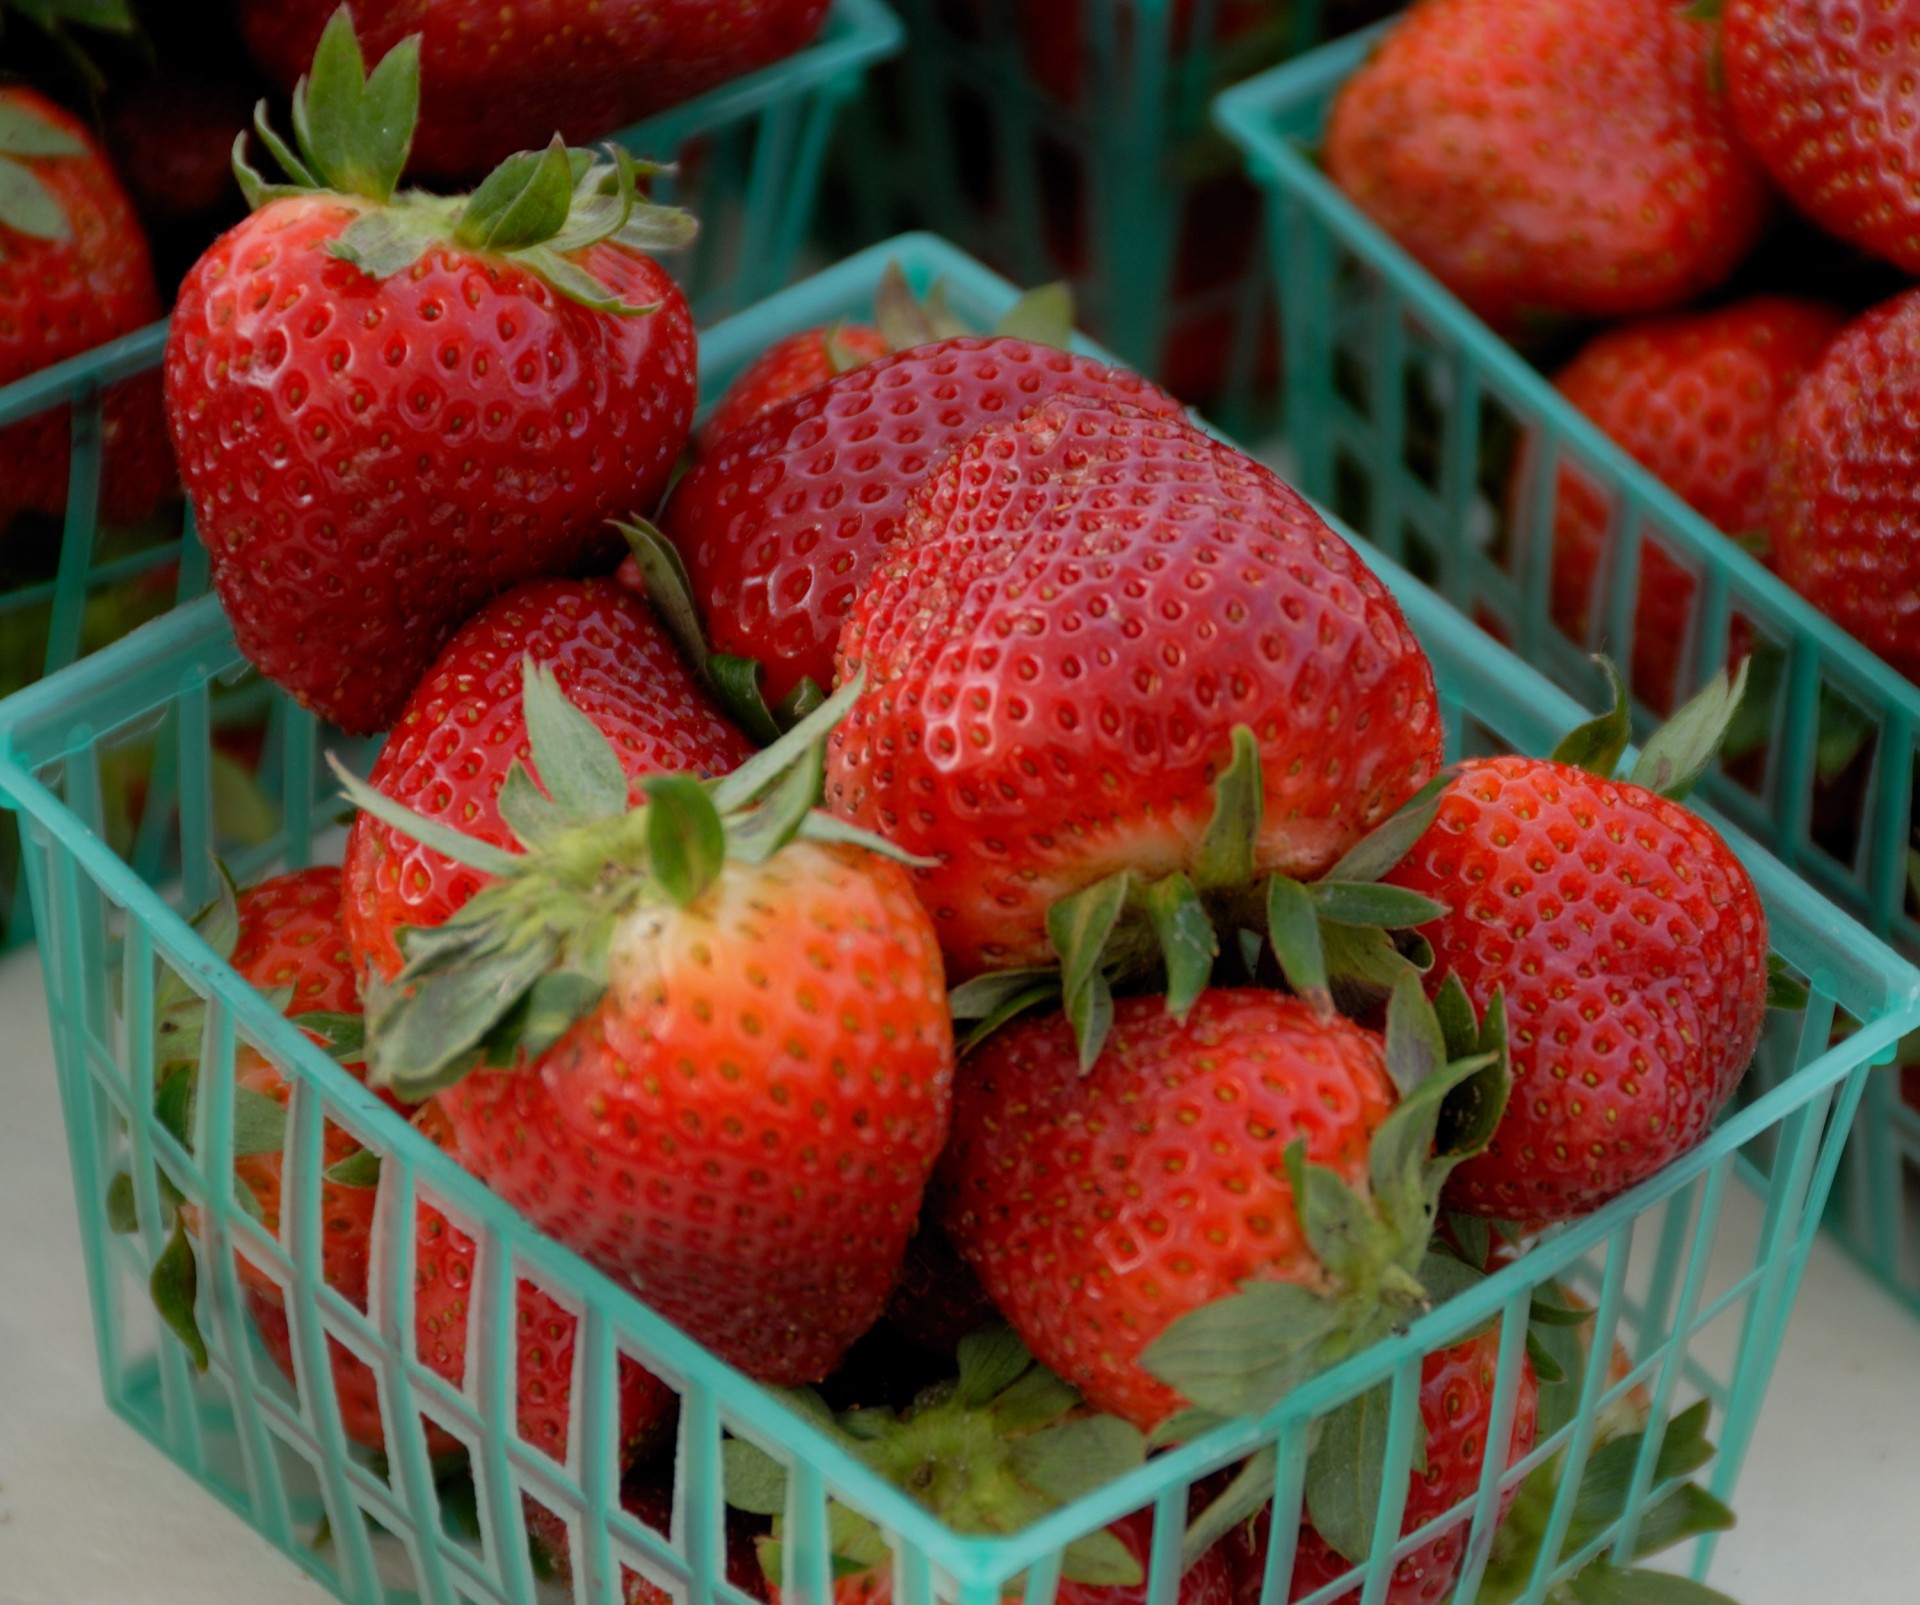 strawberries for sale market free photo